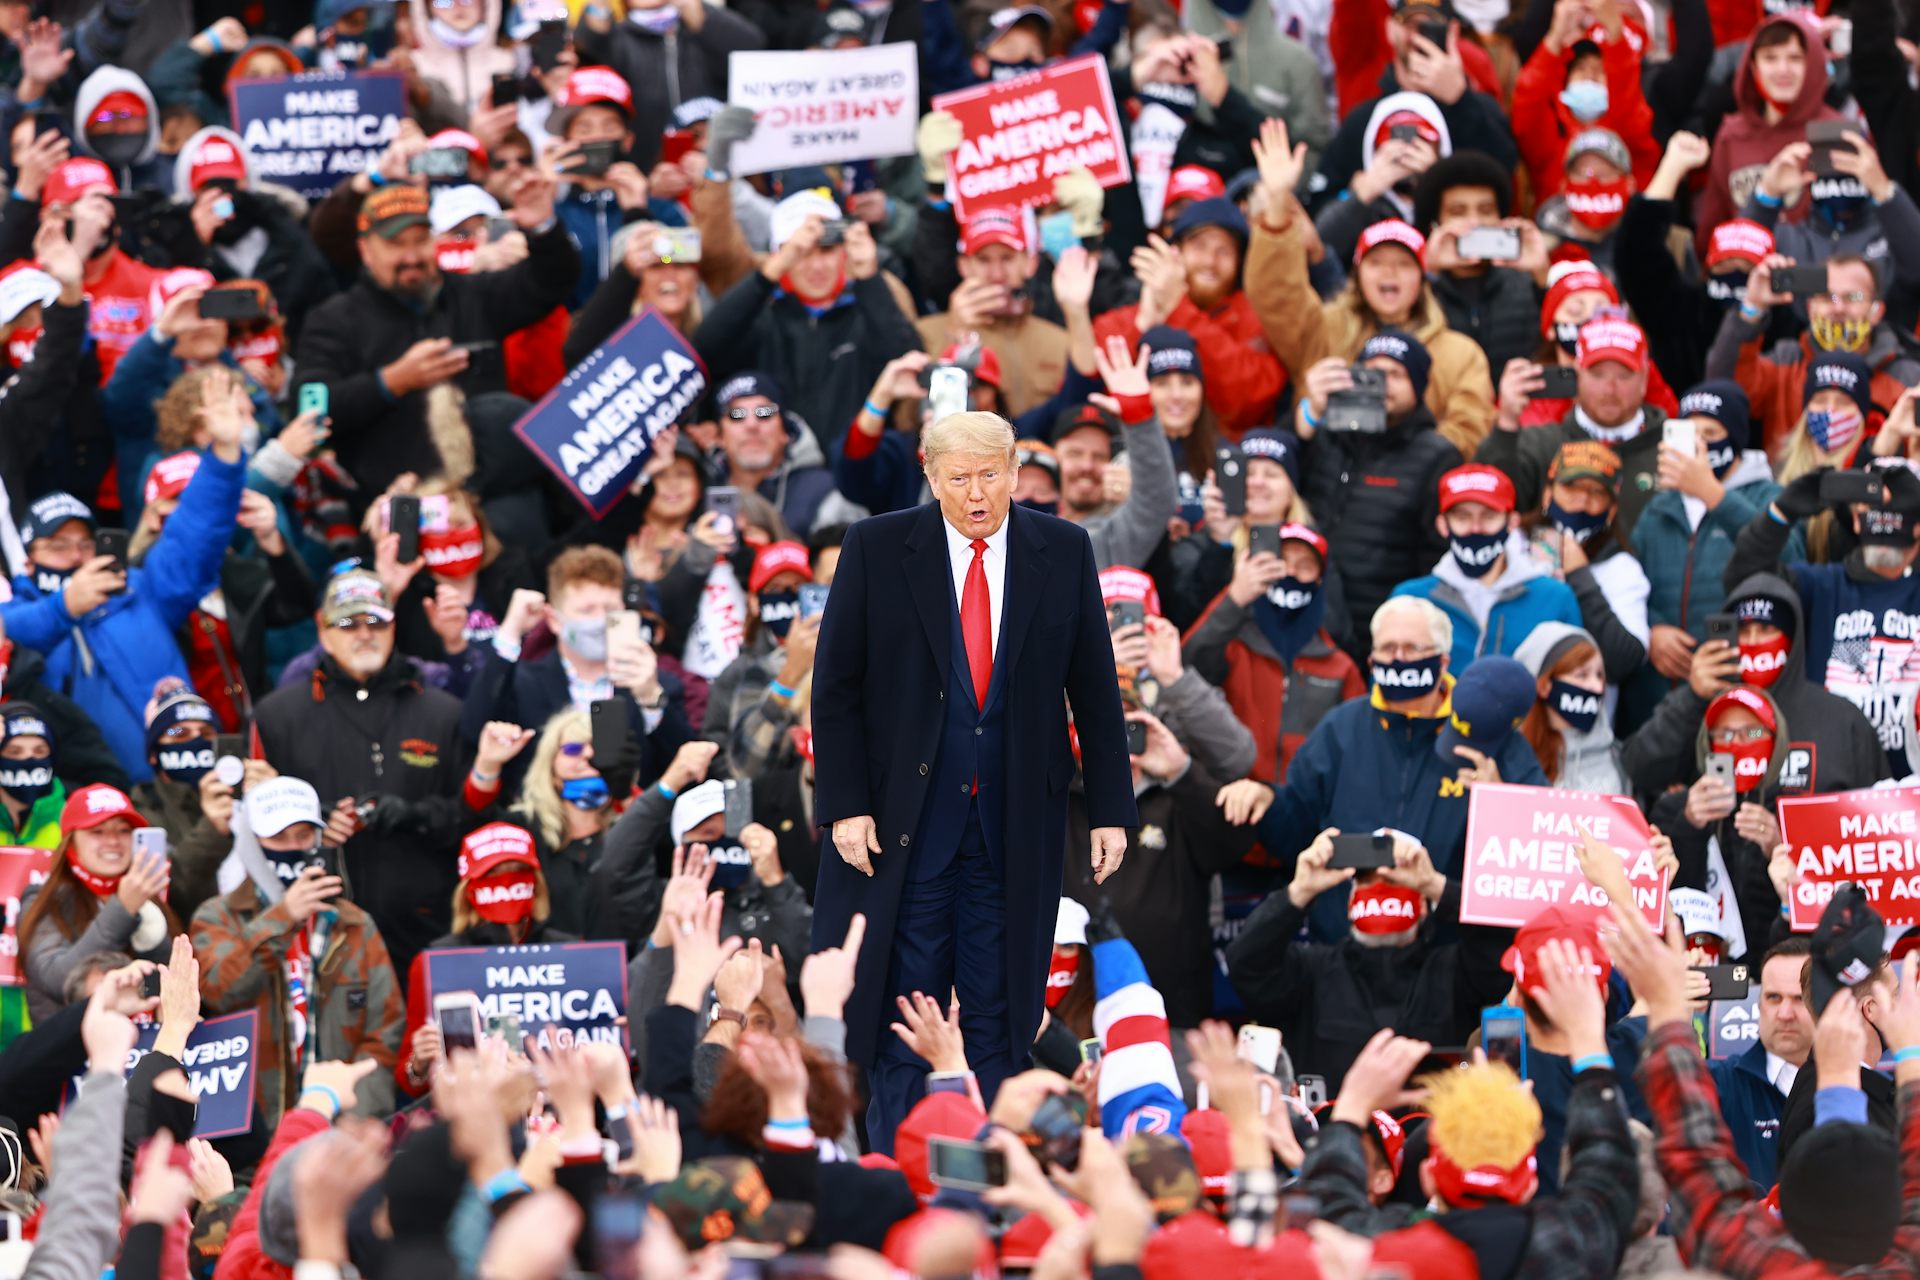 Trump in front of a crowd